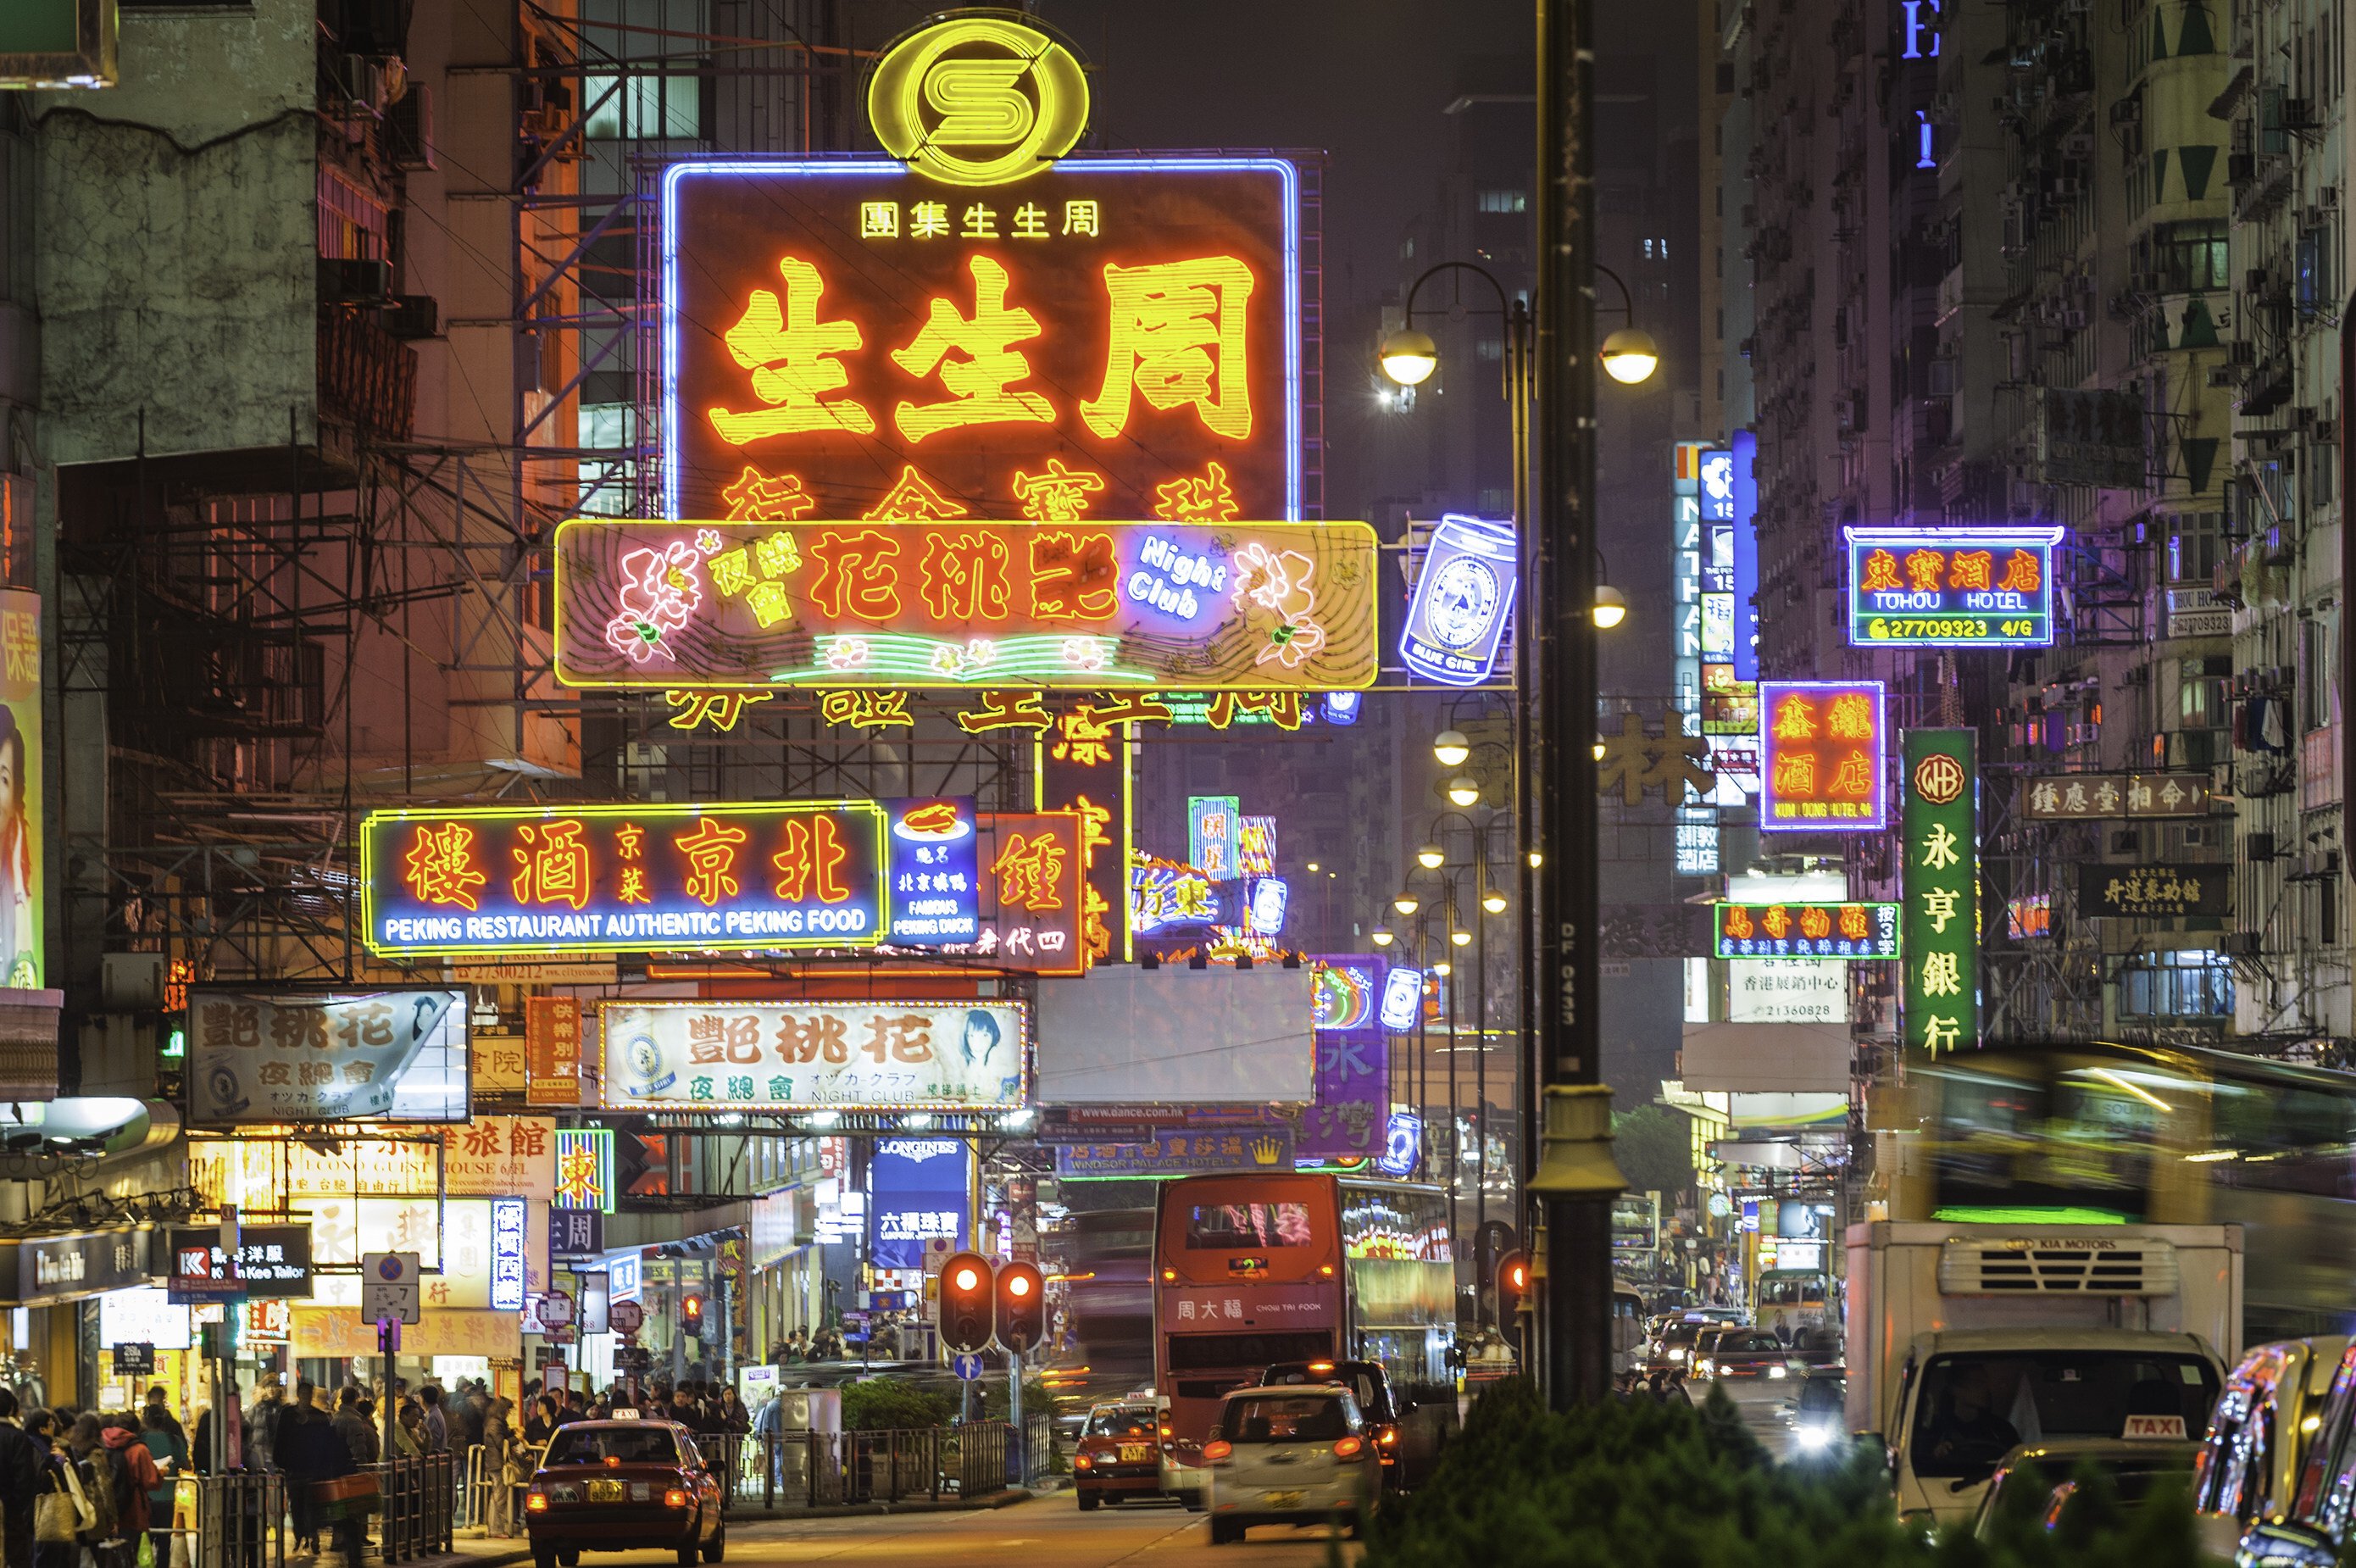 Neon signs and street lights glow above a busy night scene along Nathan Road in the crowded Tsim Sha Tsui district of Kowloon, Hong Kong. Photo: Getty Images